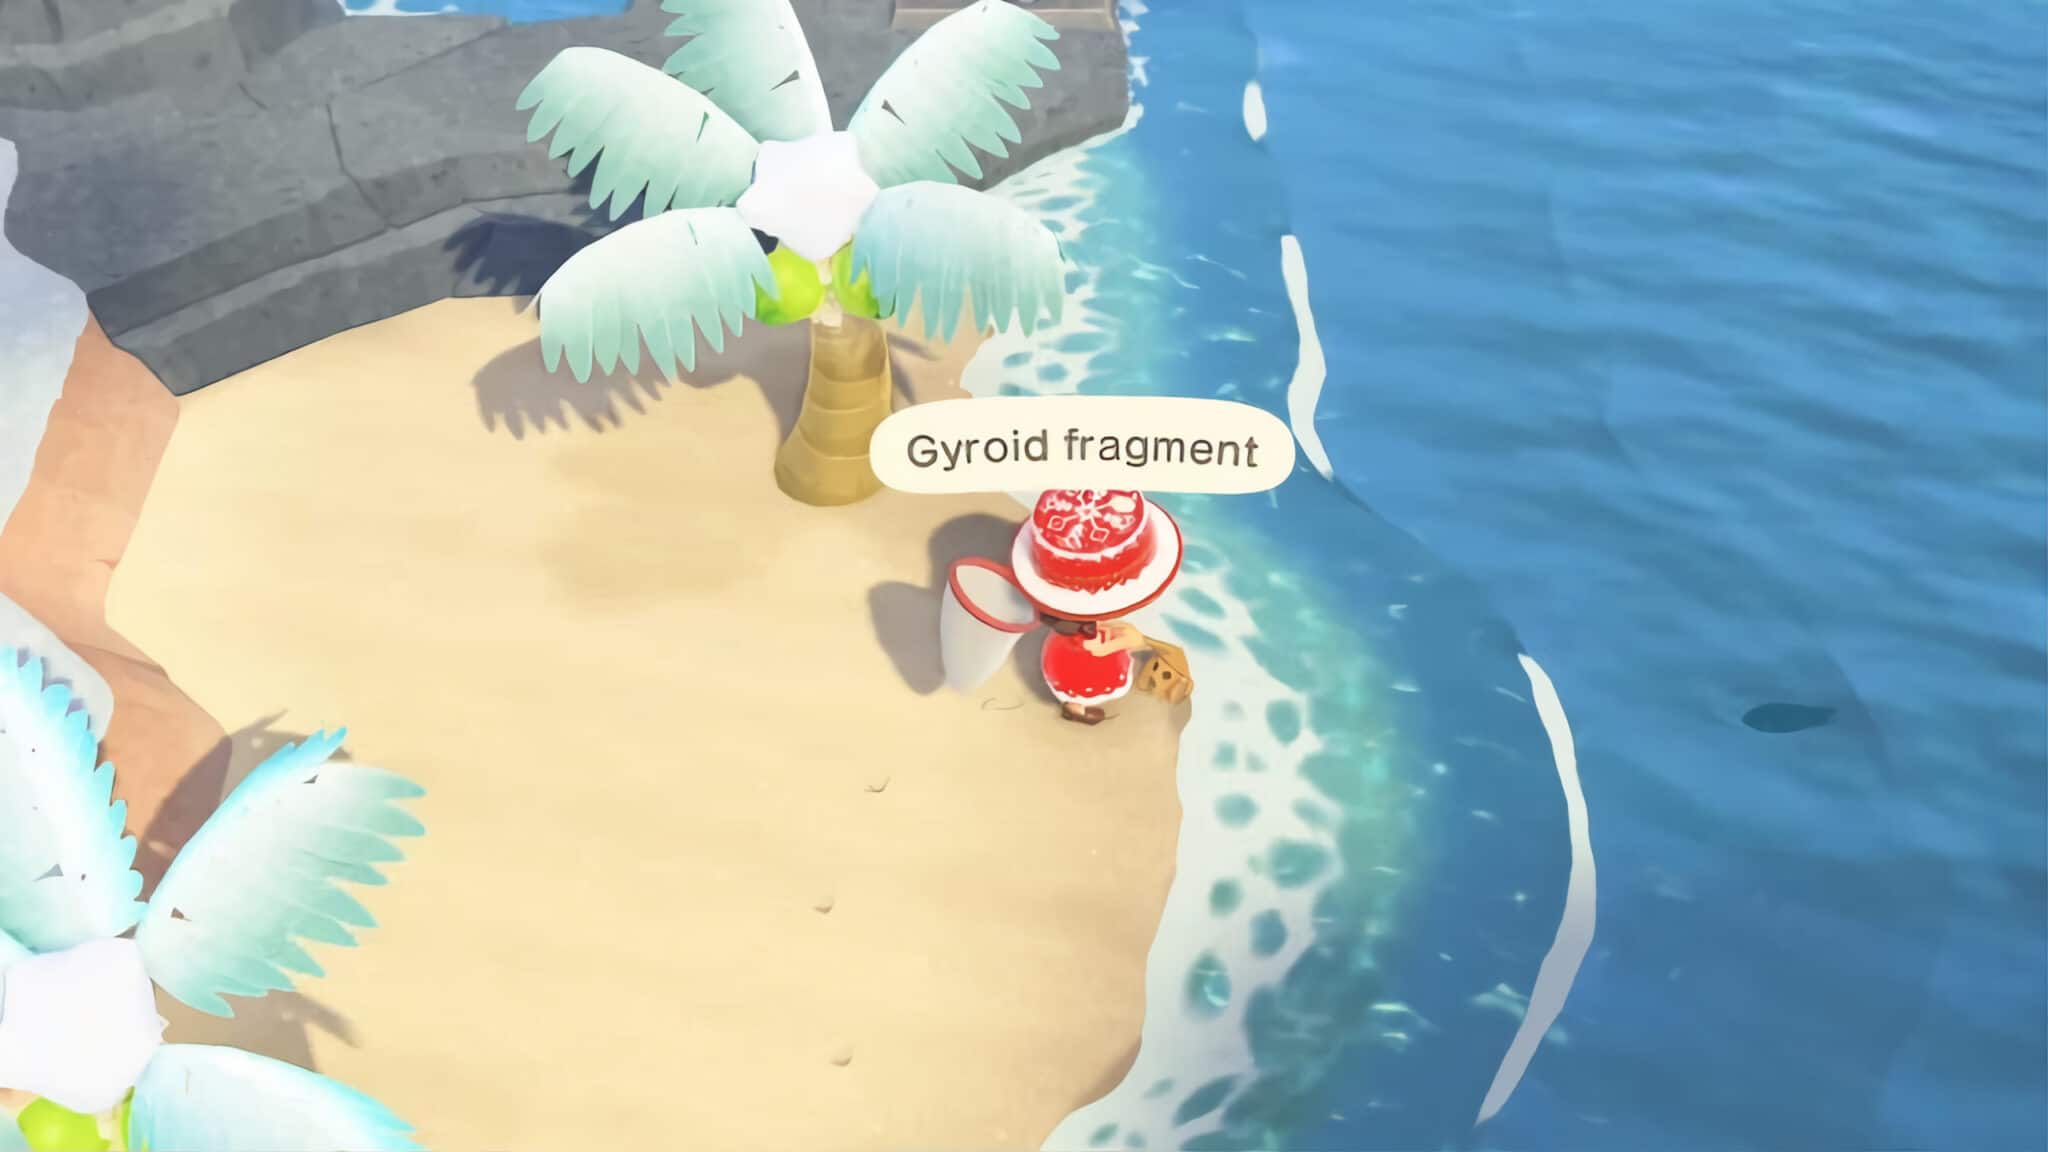 Animal Crossing: New Horizons – Gyroid Fragments on the beach